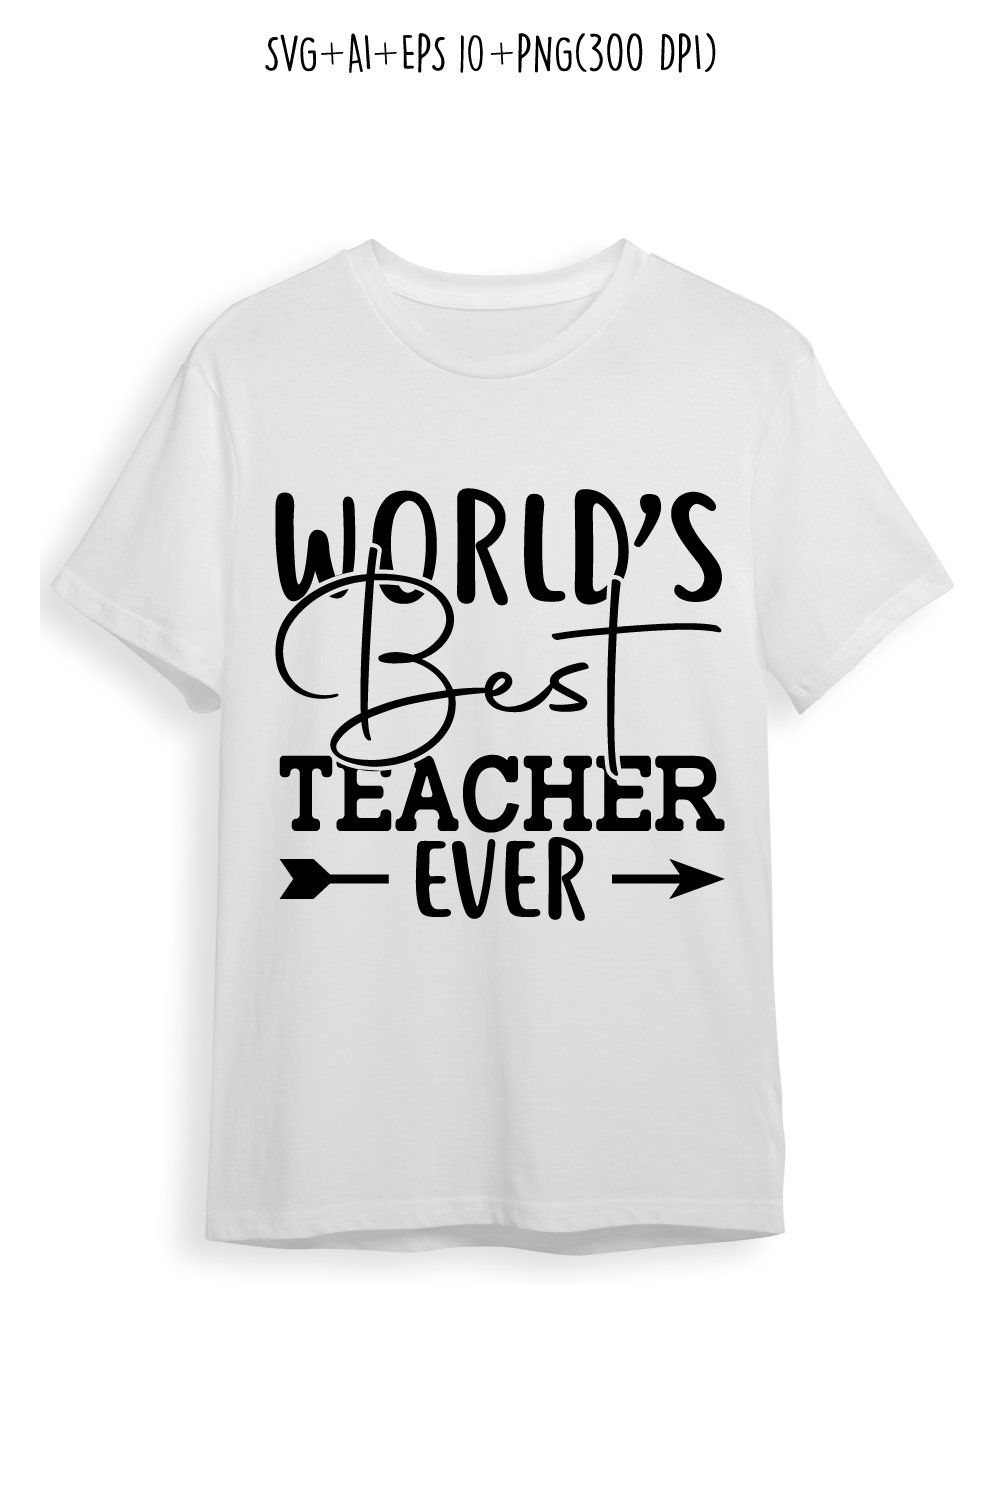 world’s best teacher ever SVG design for t-shirts, cards, frame artwork, phone cases, bags, mugs, stickers, tumblers, print, etc pinterest preview image.